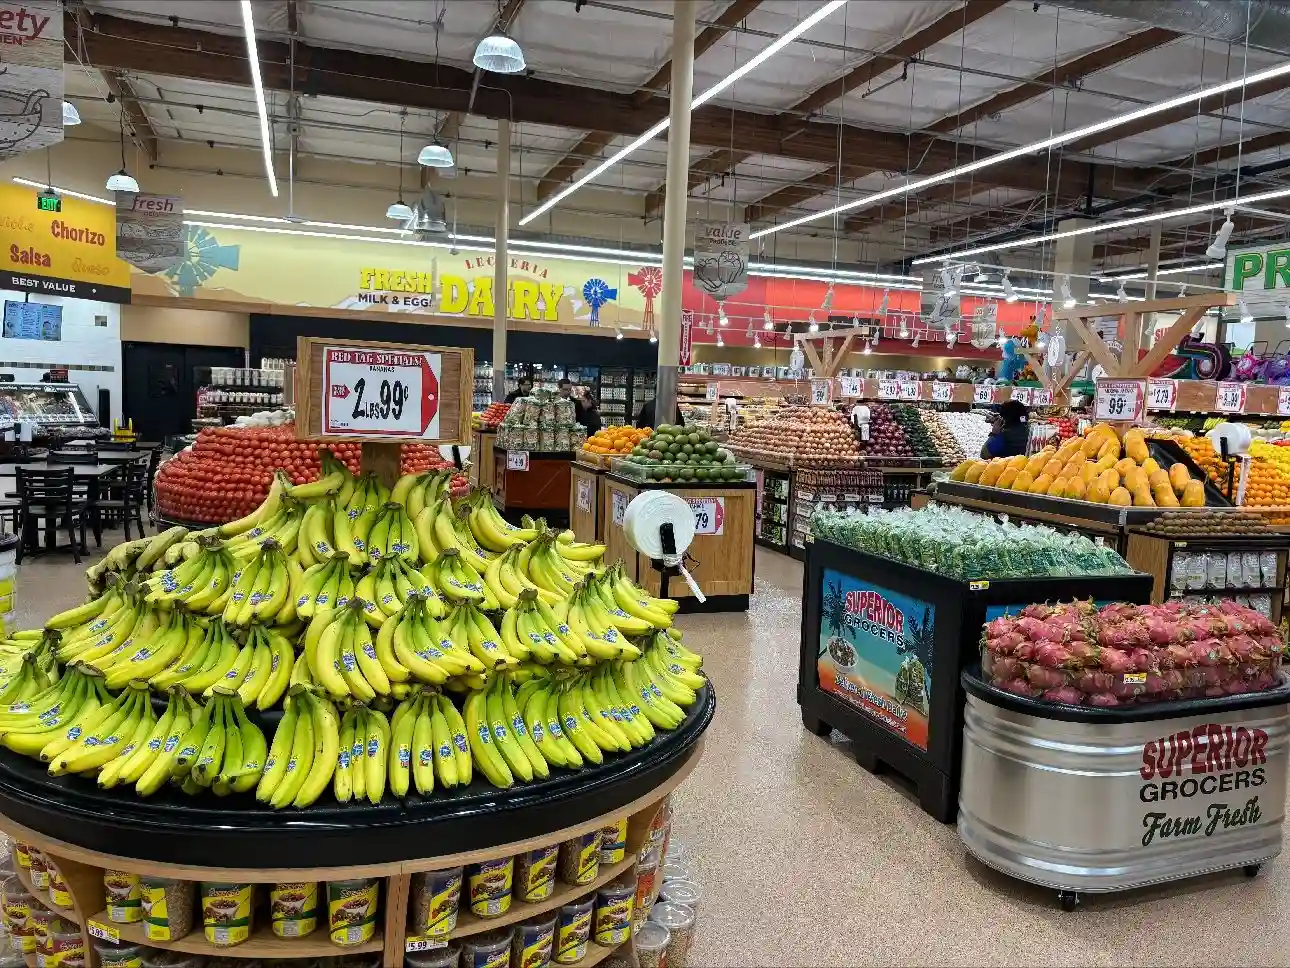 Superior Grocers new store in Dinuba, CA